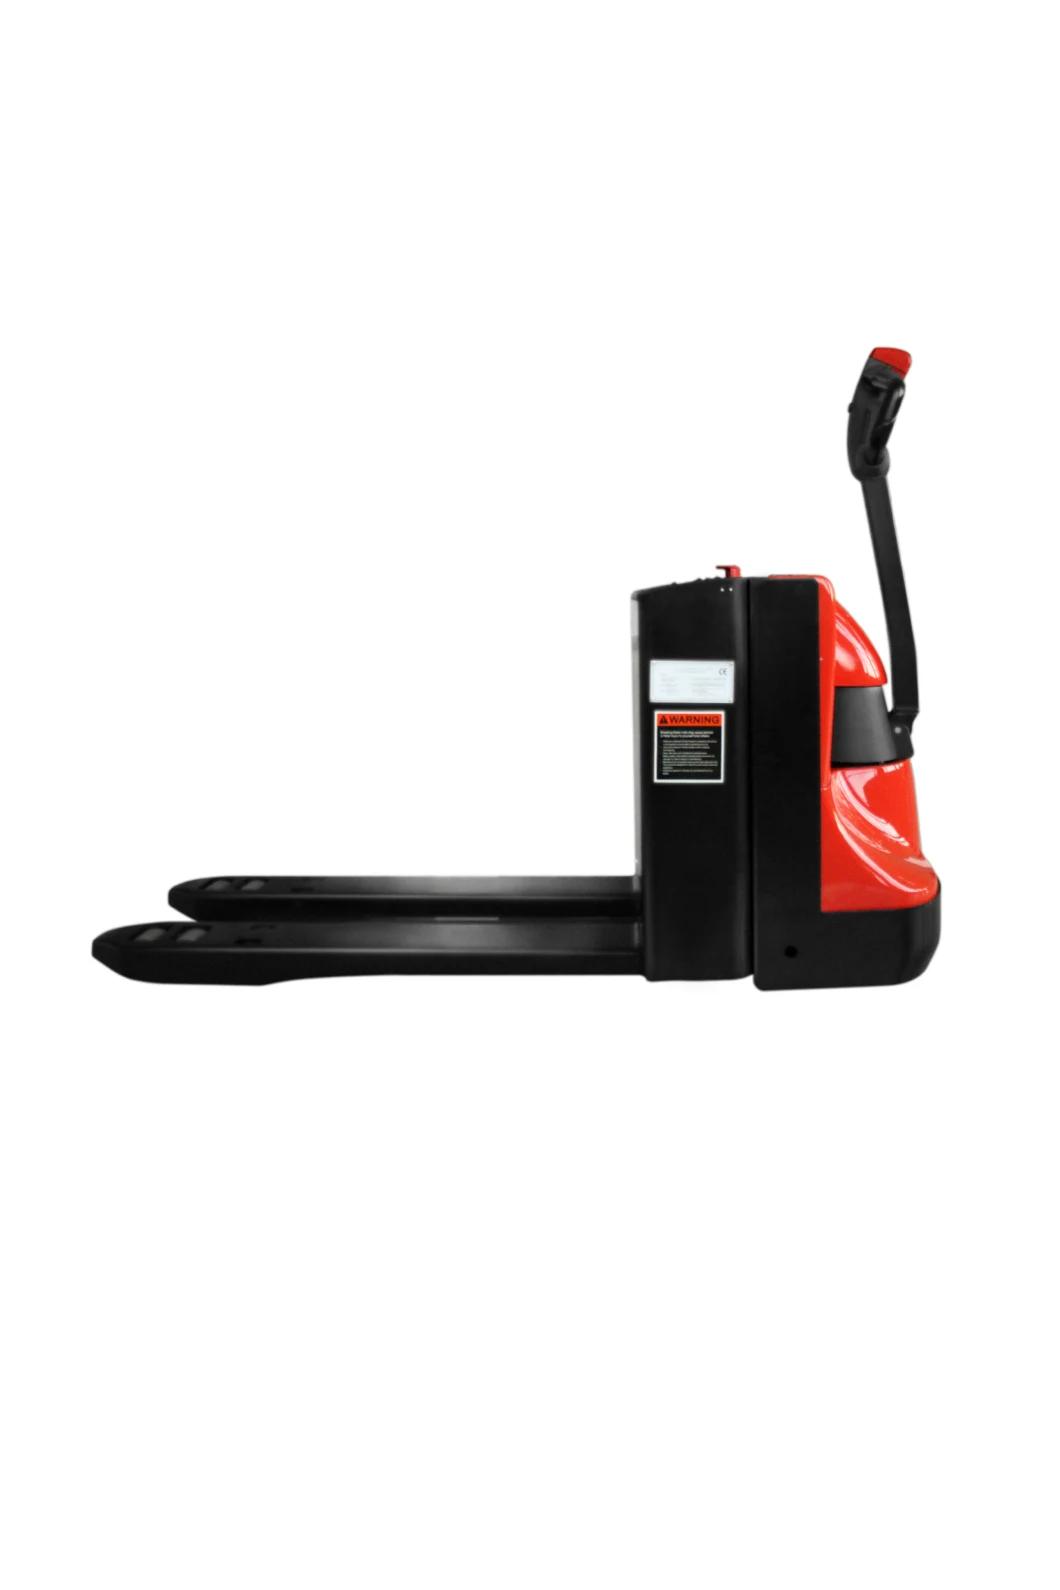 2 Ton Battery Operated Electric Pallet Truck (EPT20-20RA(S))